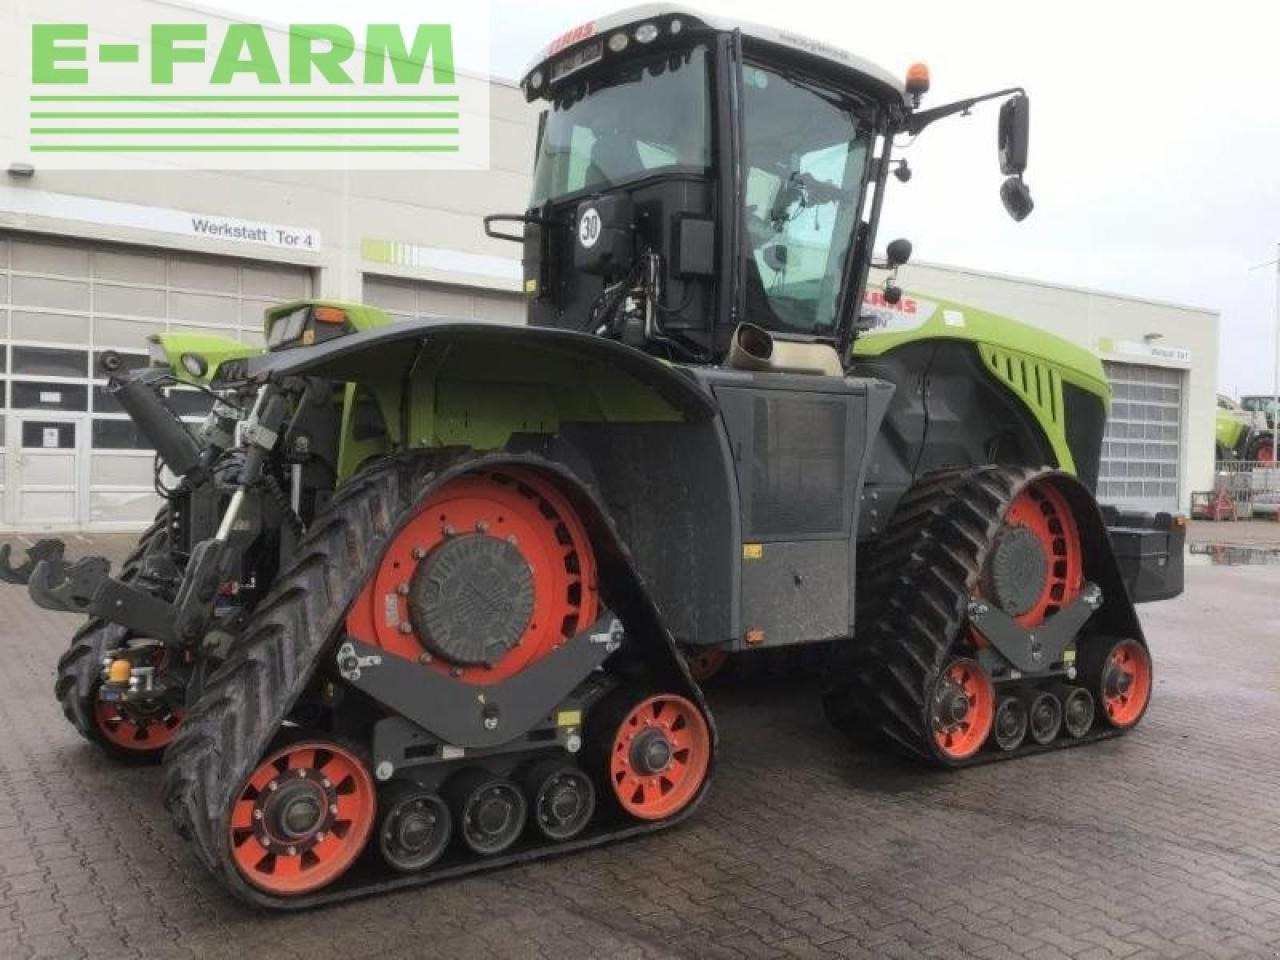 Tracteur agricole CLAAS xerion 5000 trac ts TRAC TS